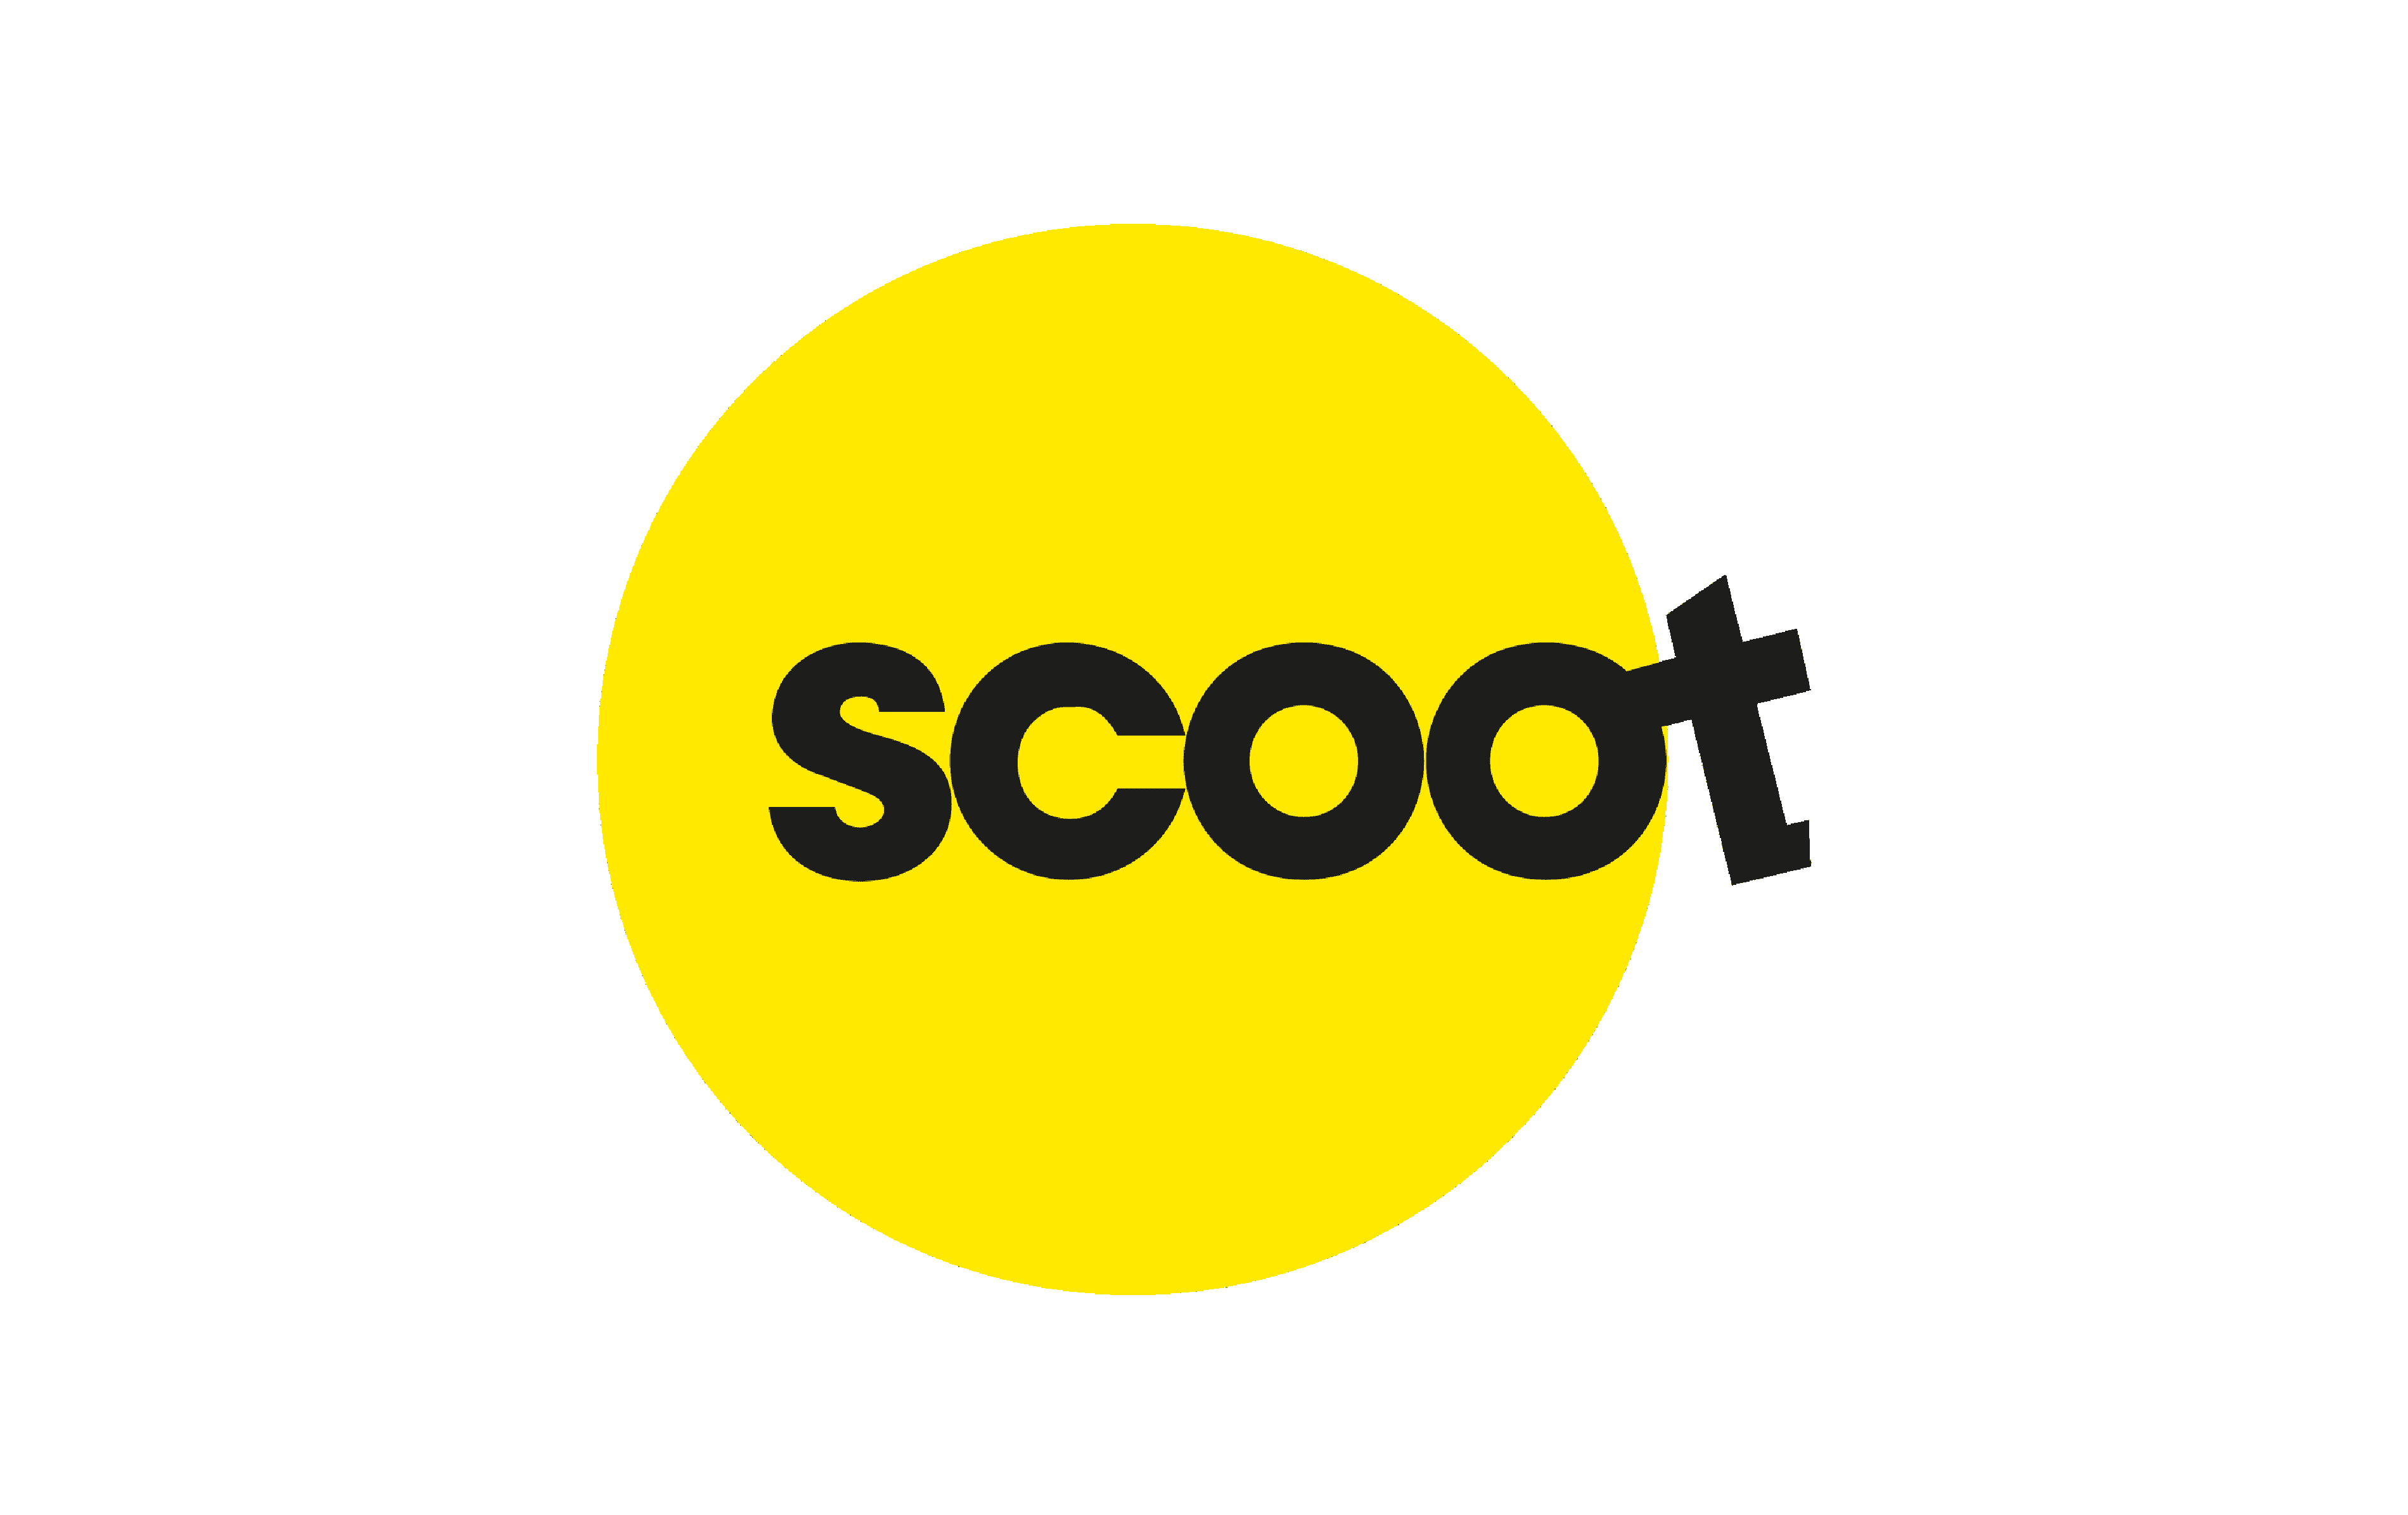 Scoot Airline